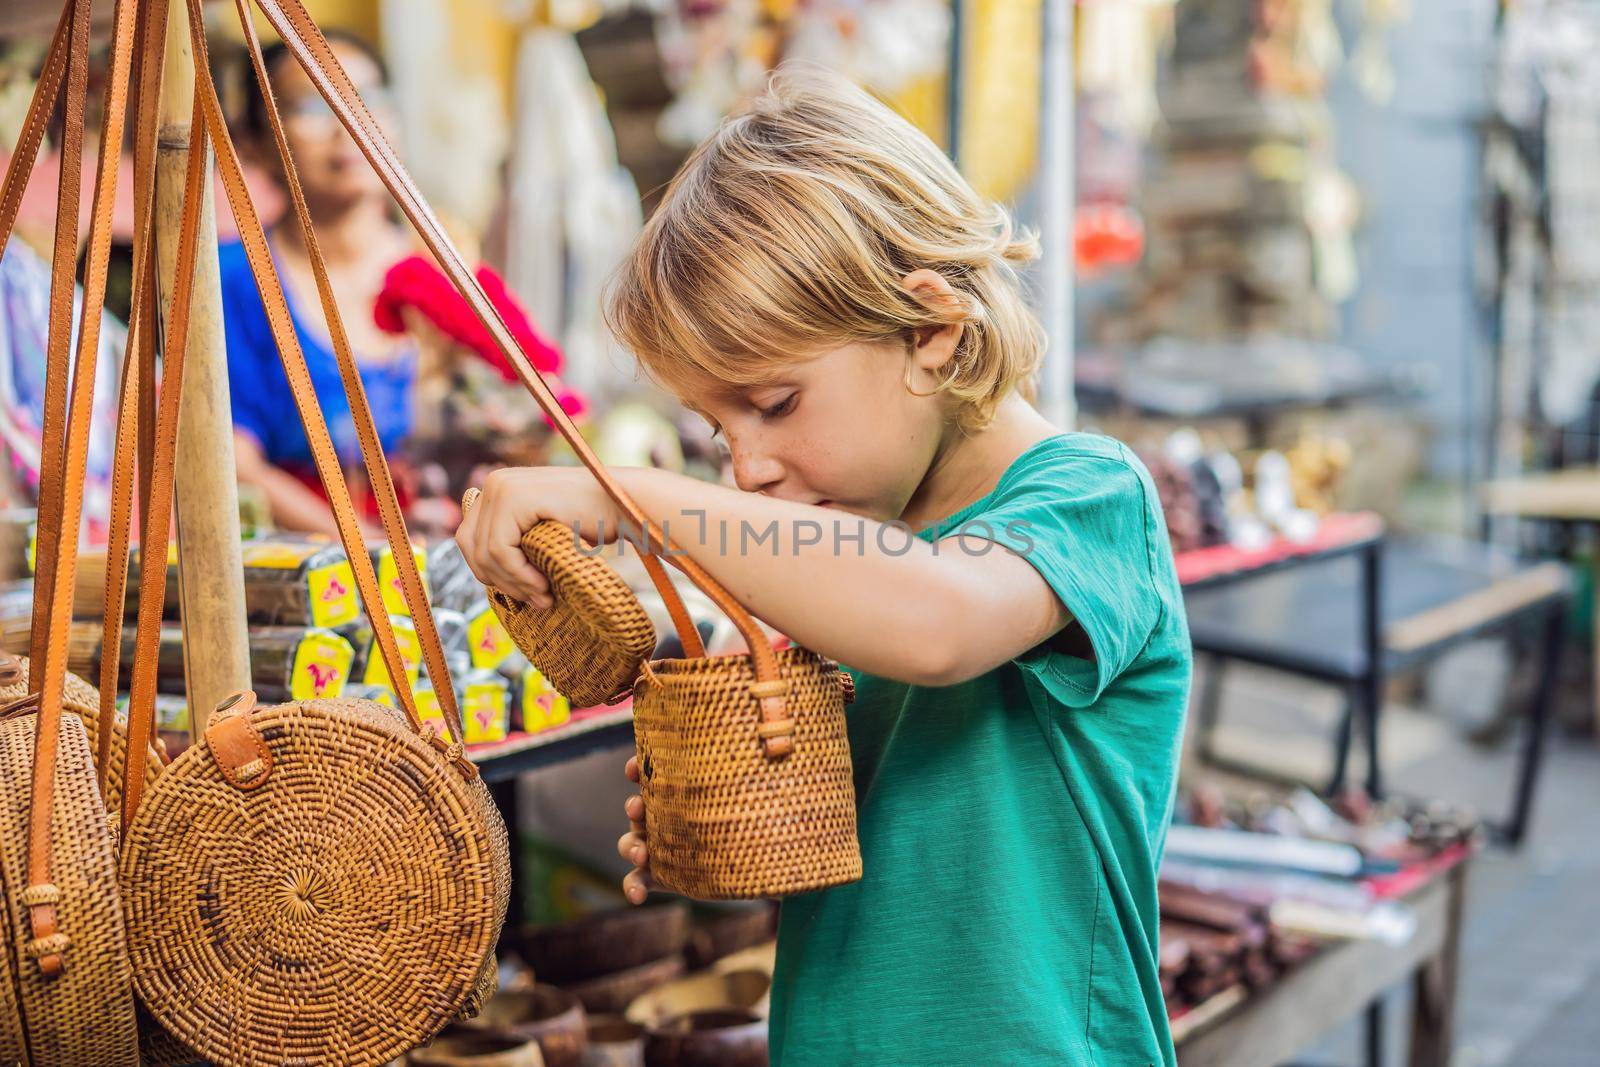 Boy at a market in Ubud, Bali. Typical souvenir shop selling souvenirs and handicrafts of Bali at the famous Ubud Market, Indonesia. Balinese market. Souvenirs of wood and crafts of local residents by galitskaya